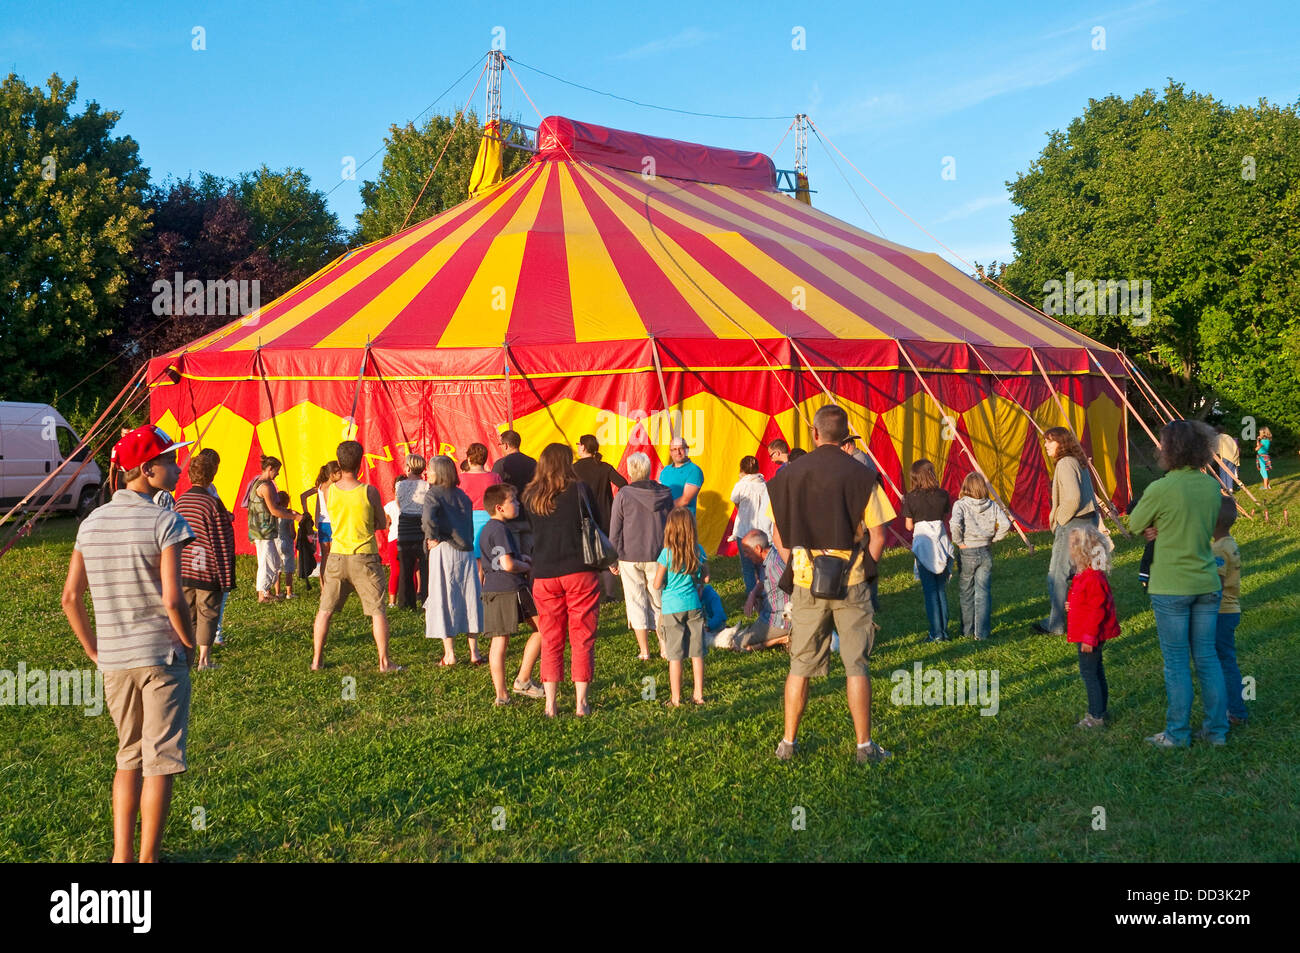 Striped yellow and red circus tent with crowd - France. Stock Photo